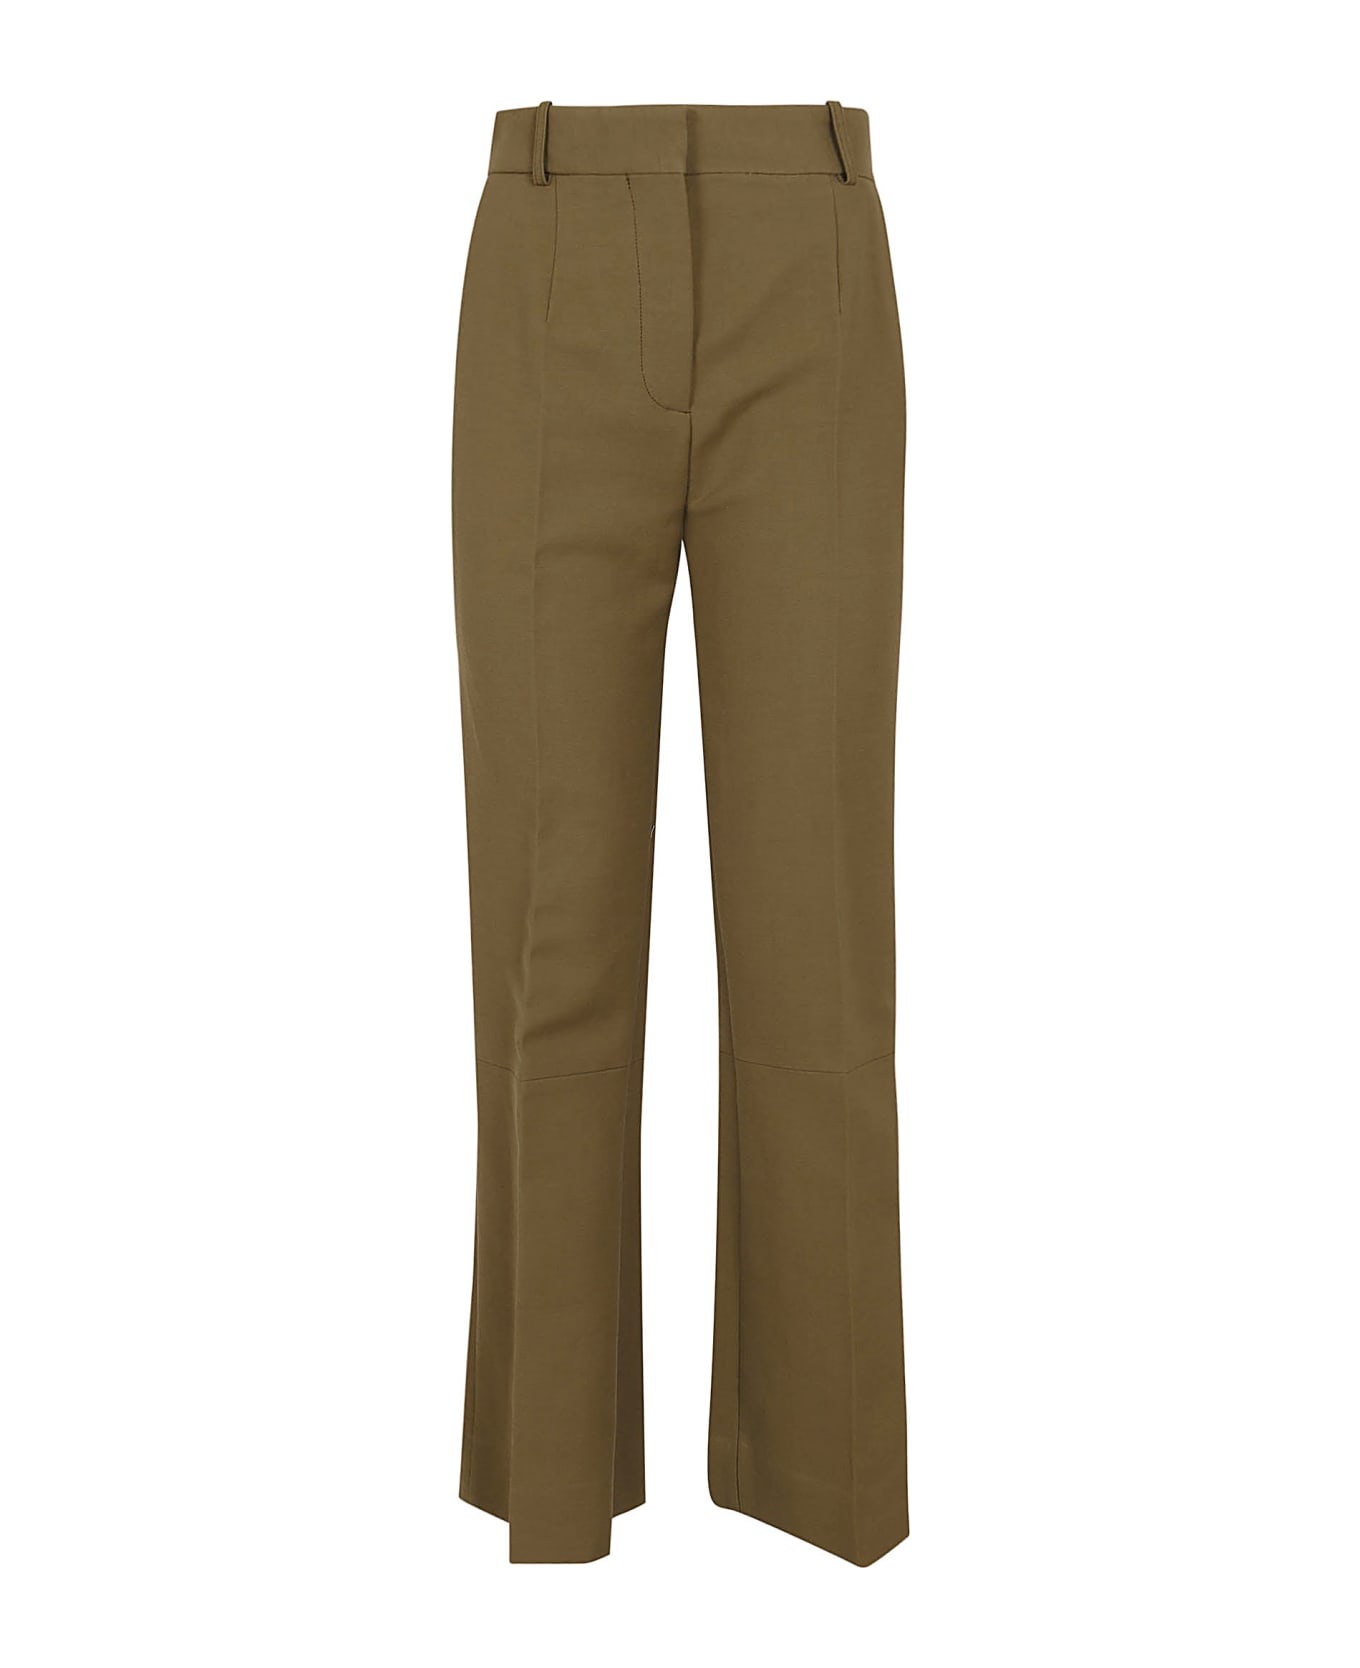 Victoria Beckham Cropped Kick Trousers - Seaweed